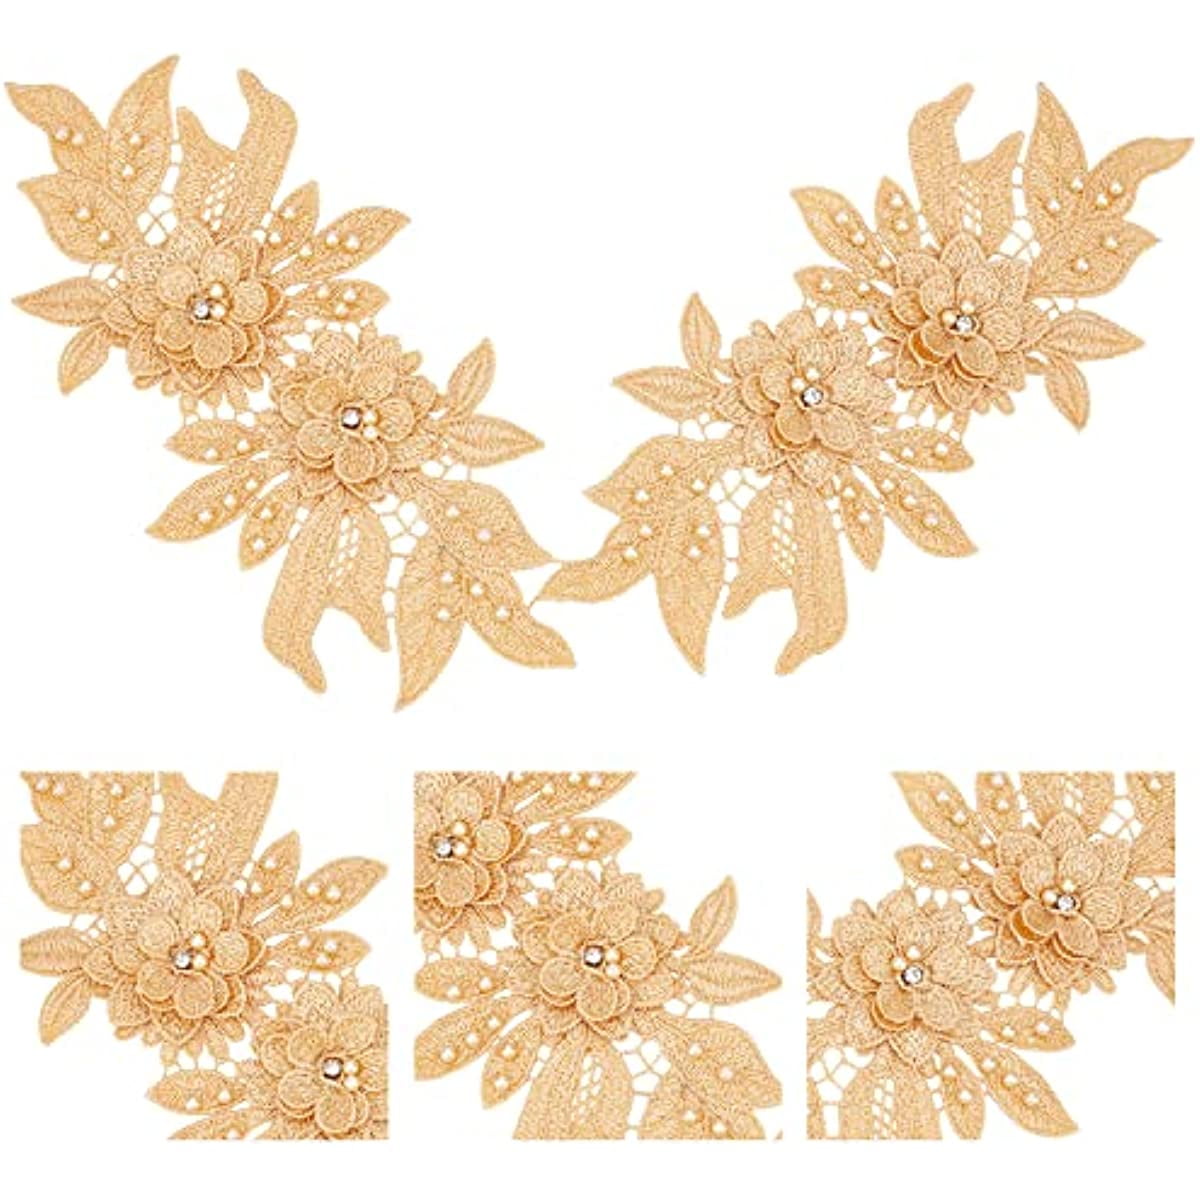 Floral Beaded 3-D Applique in Black Perfect for Costume 